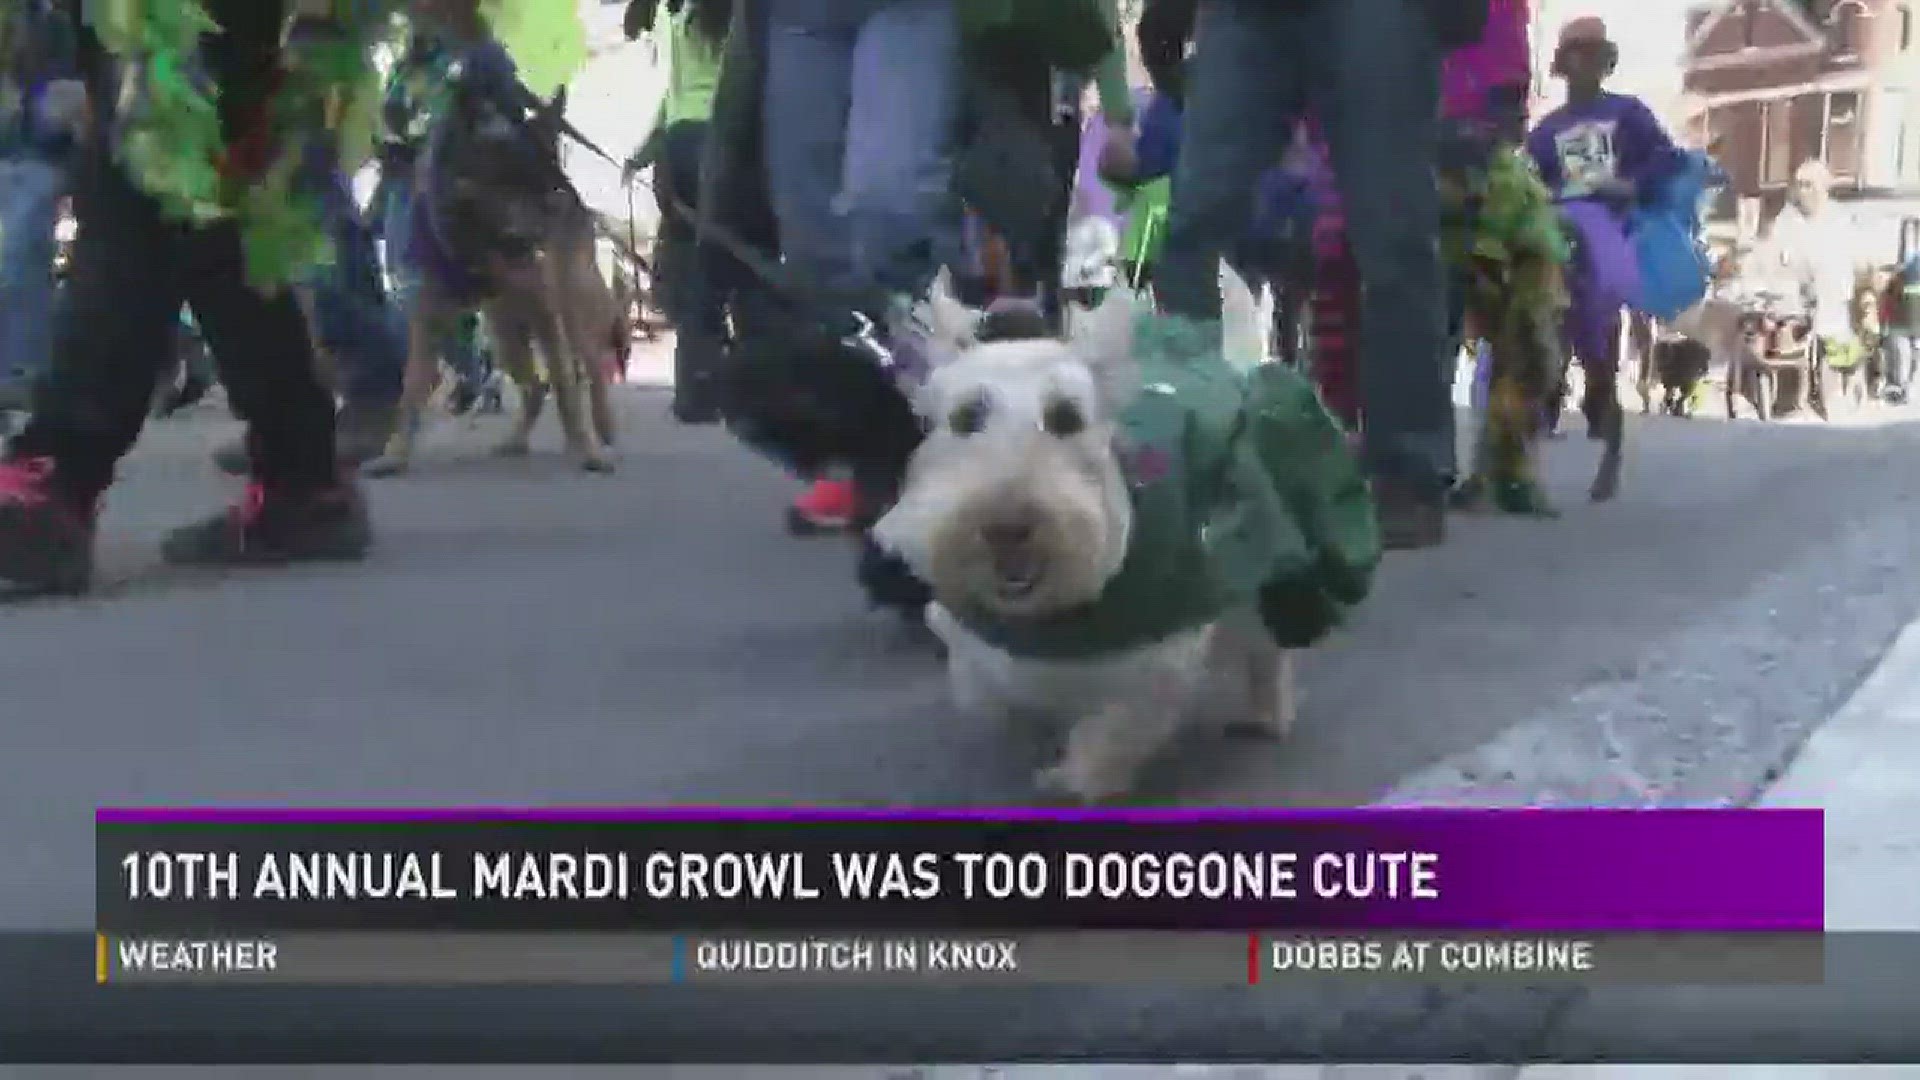 The festivity for animal lovers was just too doggone cute.